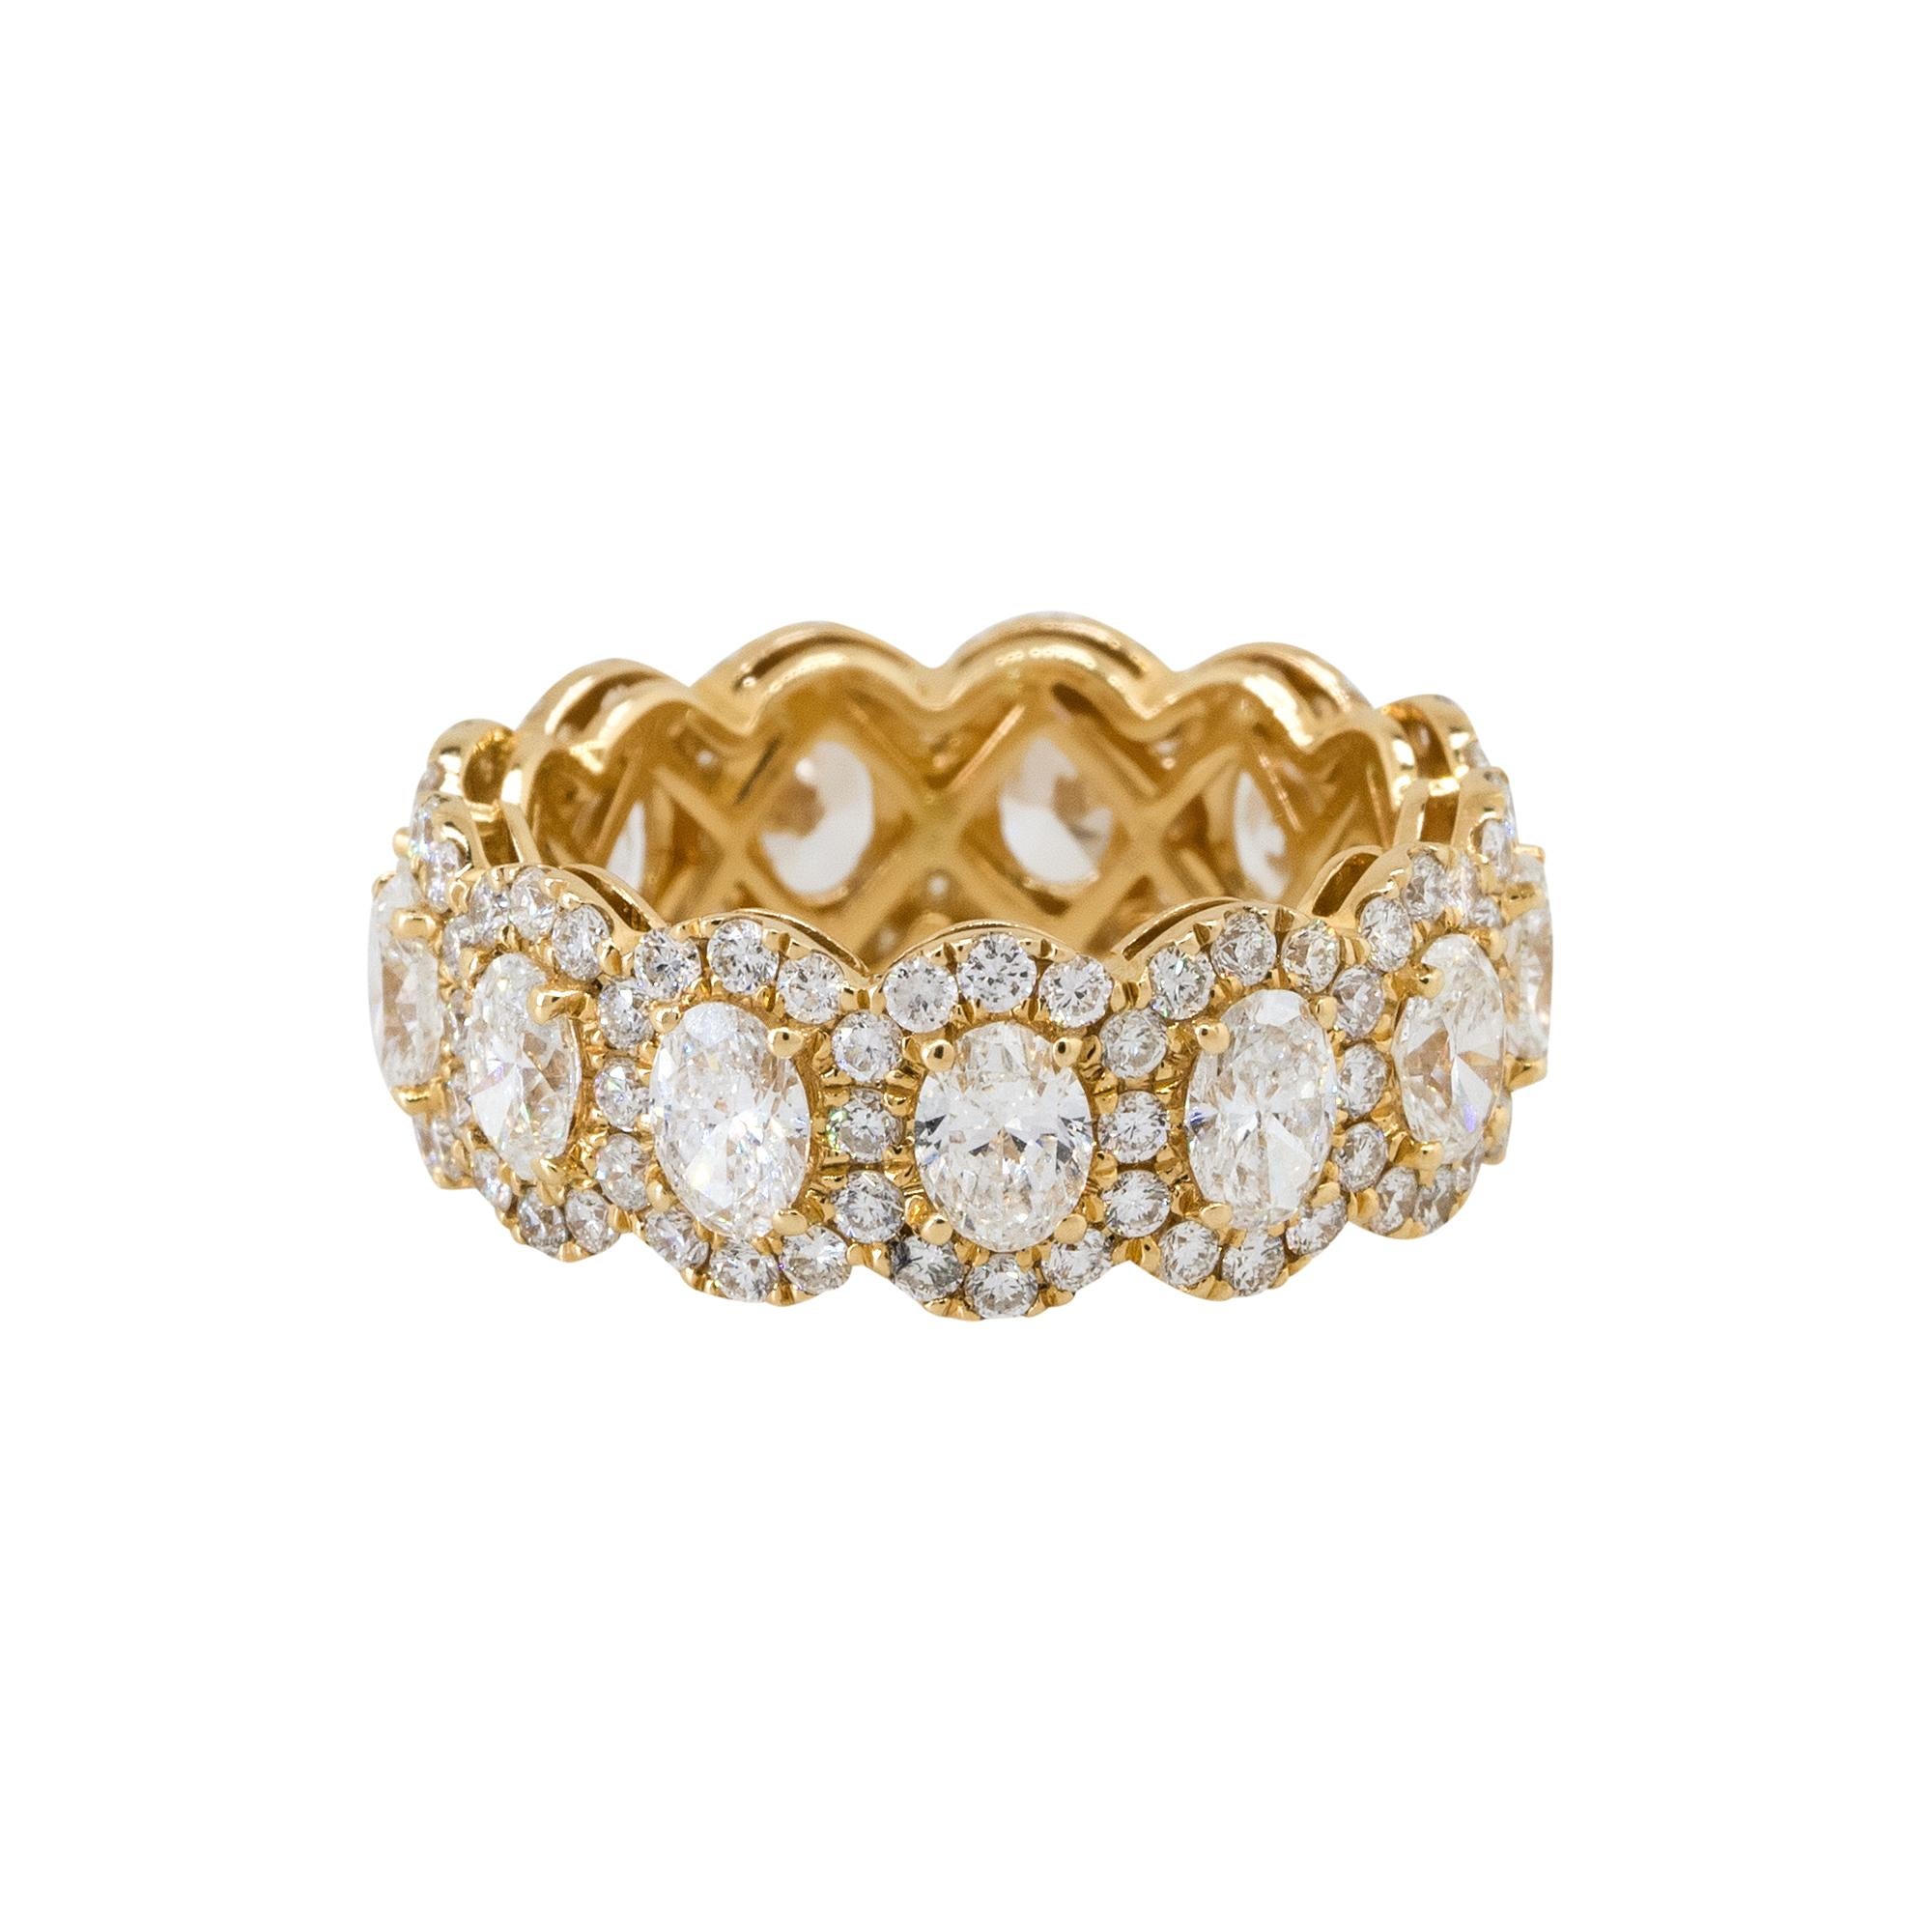 18k Gelbgold 4,21ctw Oval & Runde Diamant Scalloped Eternity Band

MATERIAL: 18k Gelbgold
Diamanten Details: Ungefähr 2,69ctw von Oval Cut Diamanten. Ungefähr 1,52ctw Diamanten im Rundschliff. Diamanten sind G/H in Farbe und VS in